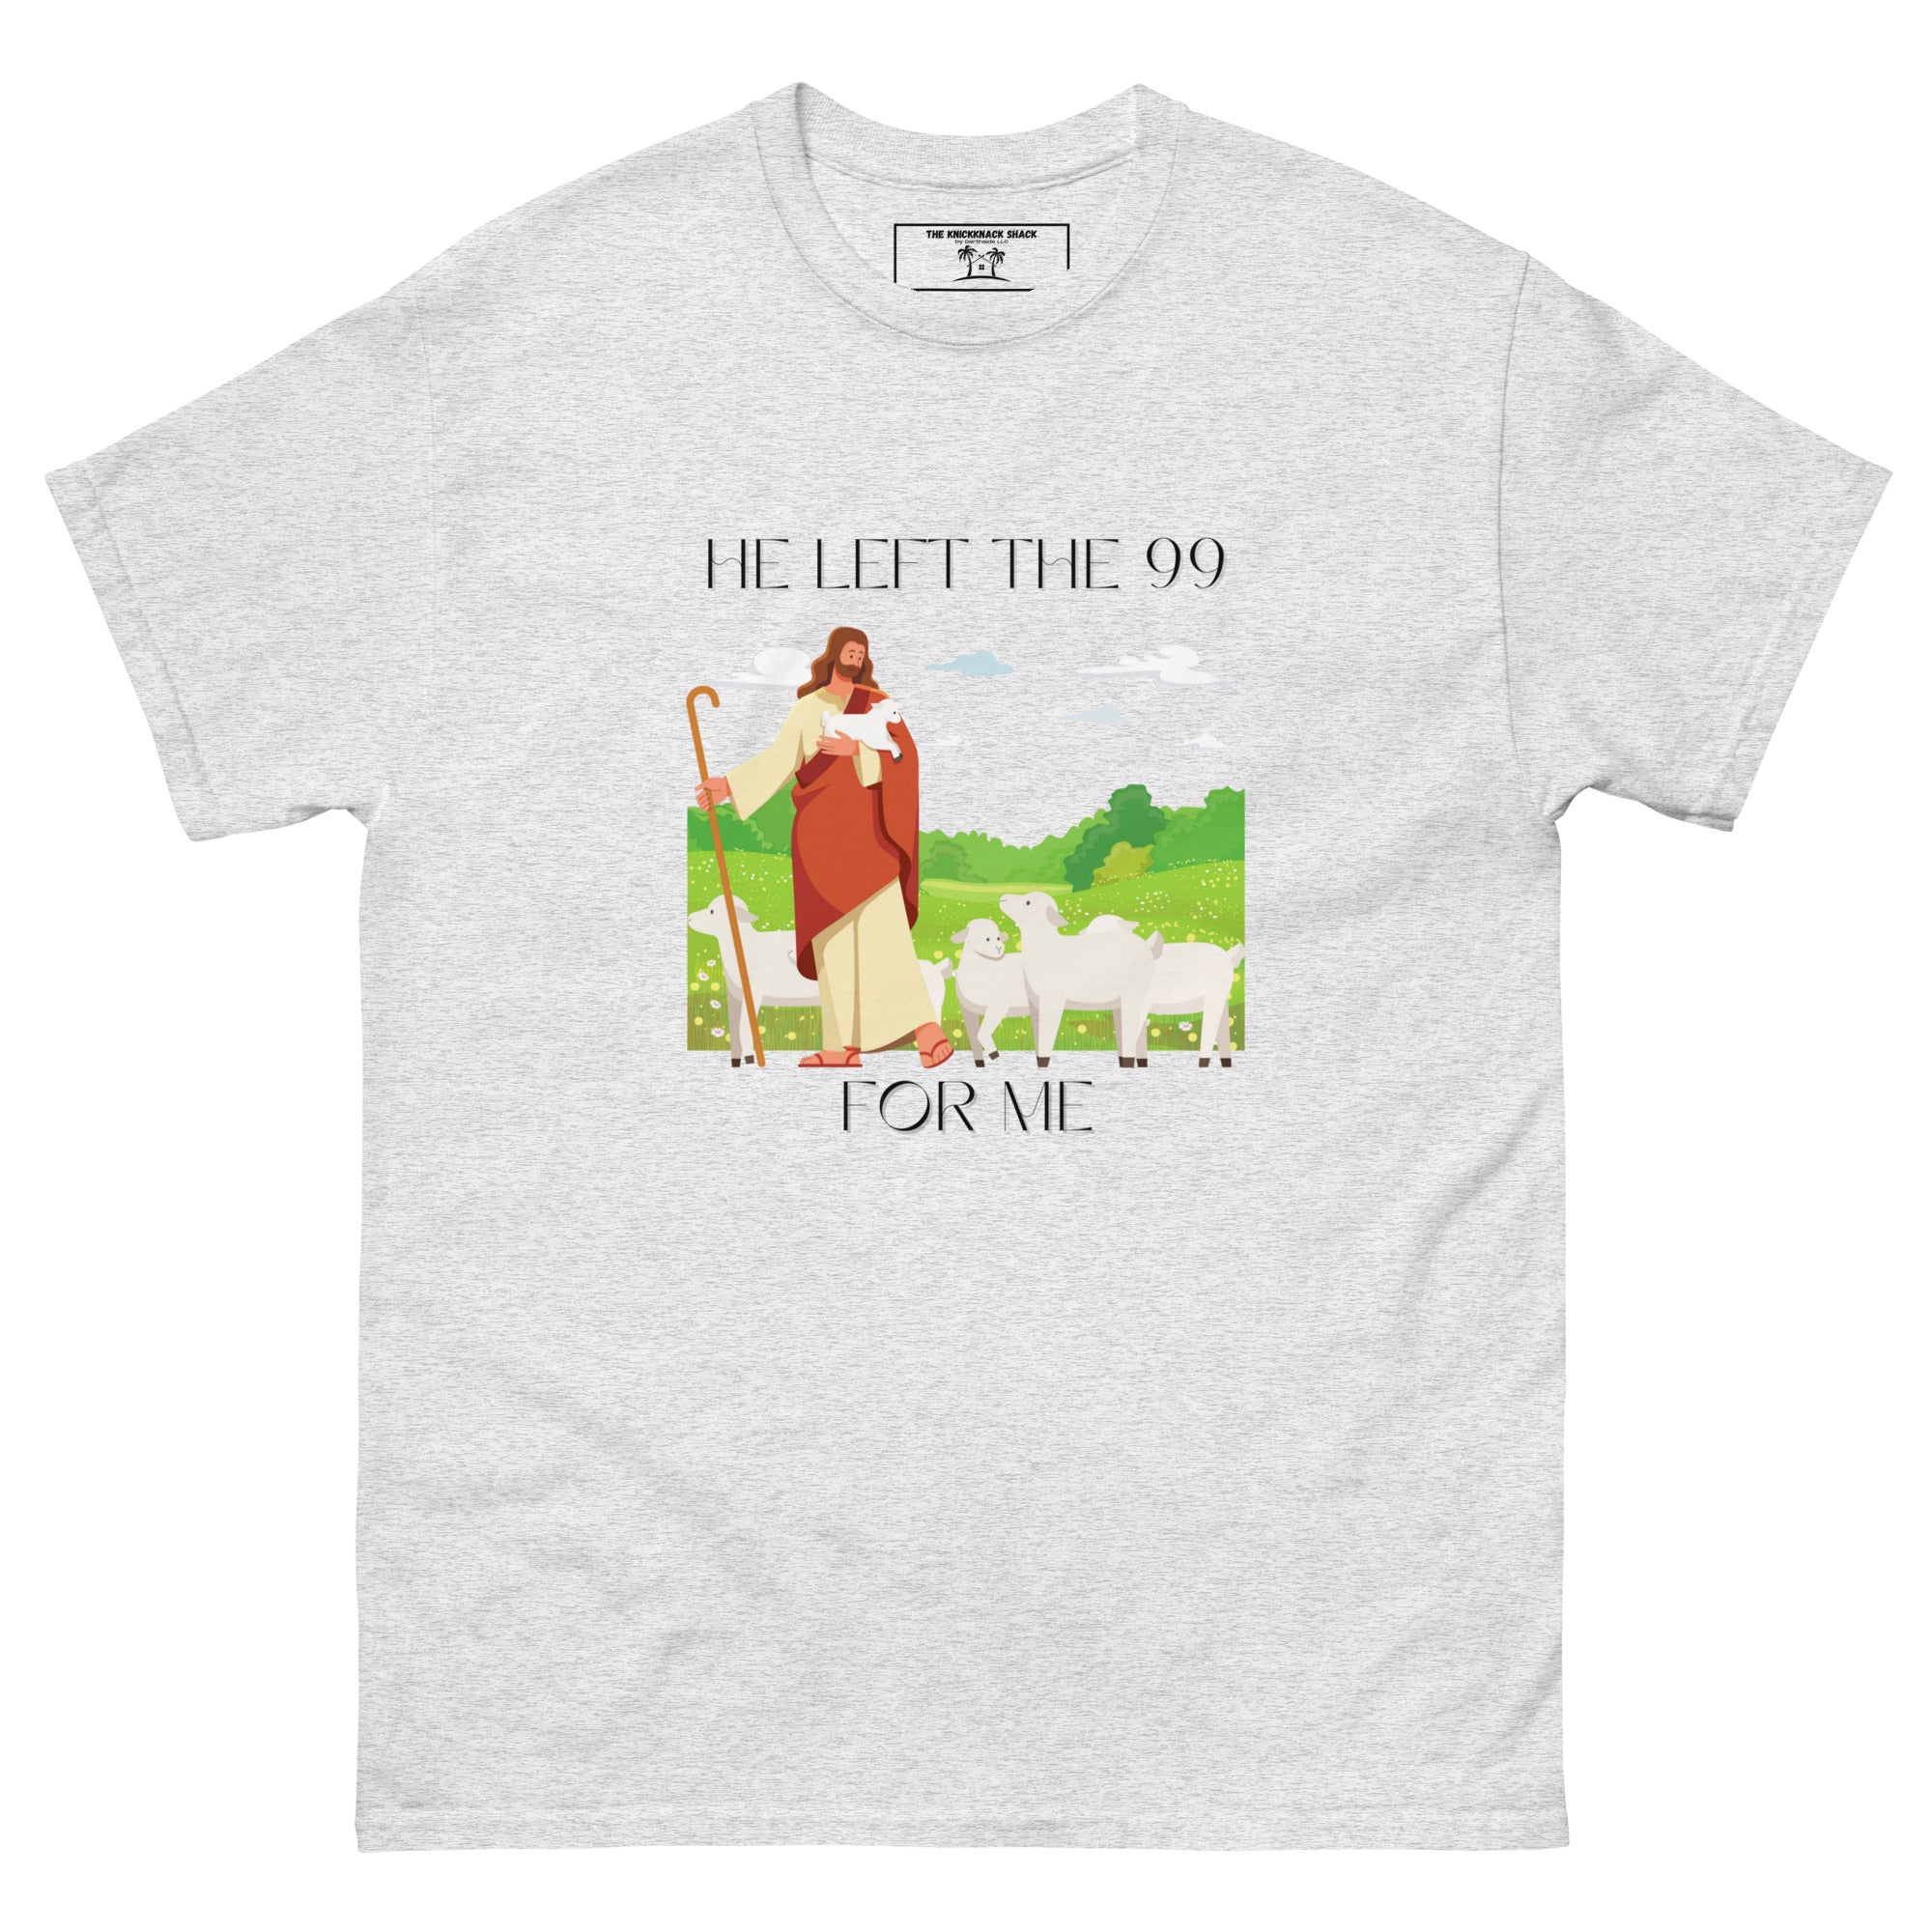 Classic Tee - He Left the 99 for Me (Light Colors)